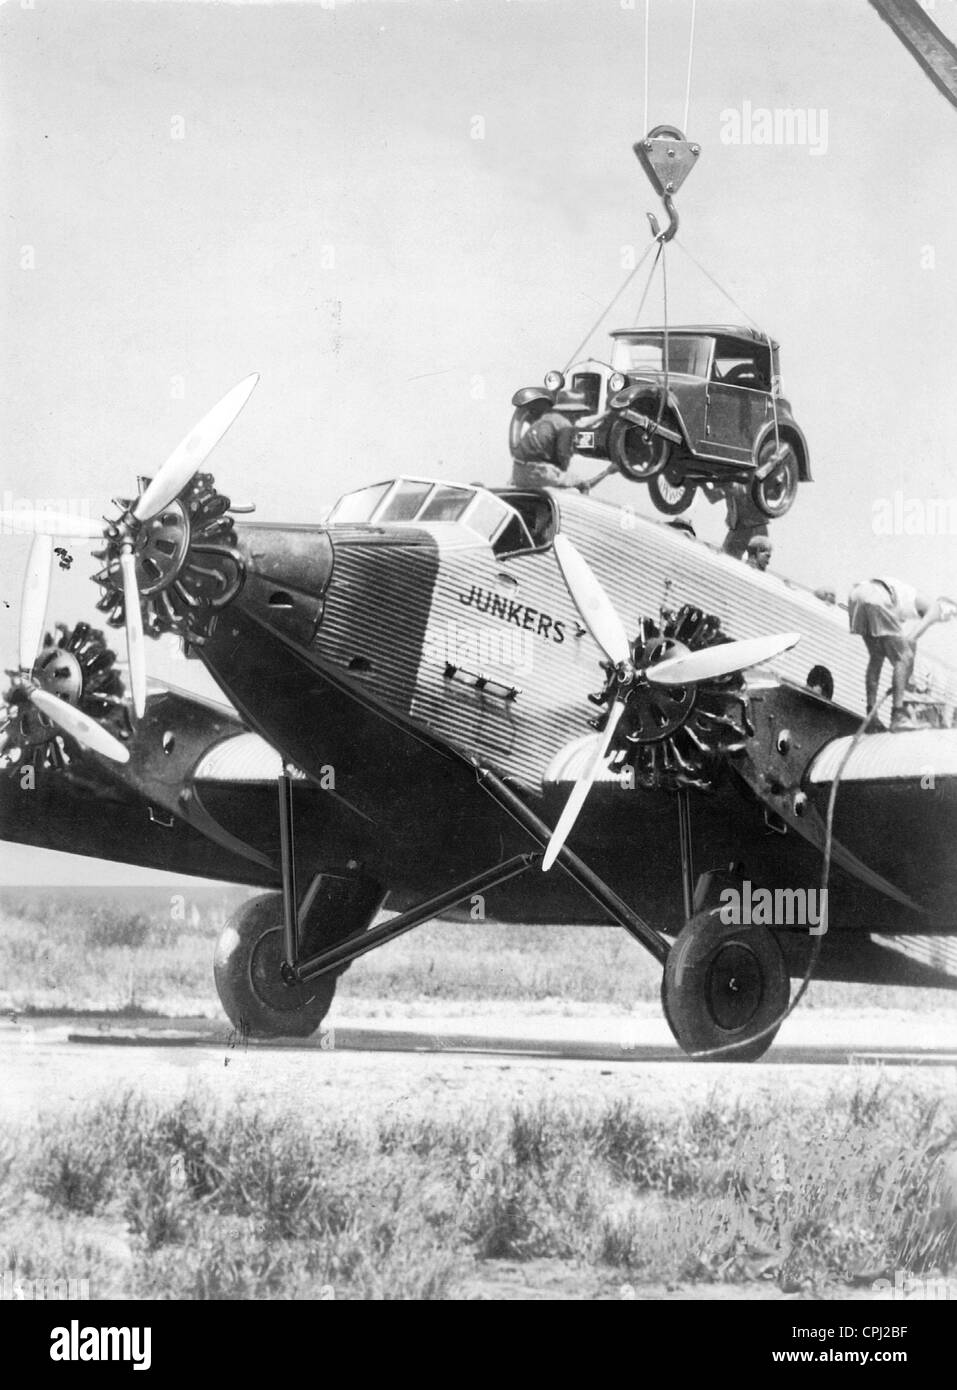 The loading of a Junkers G 31 with machine parts, 1937 Stock Photo